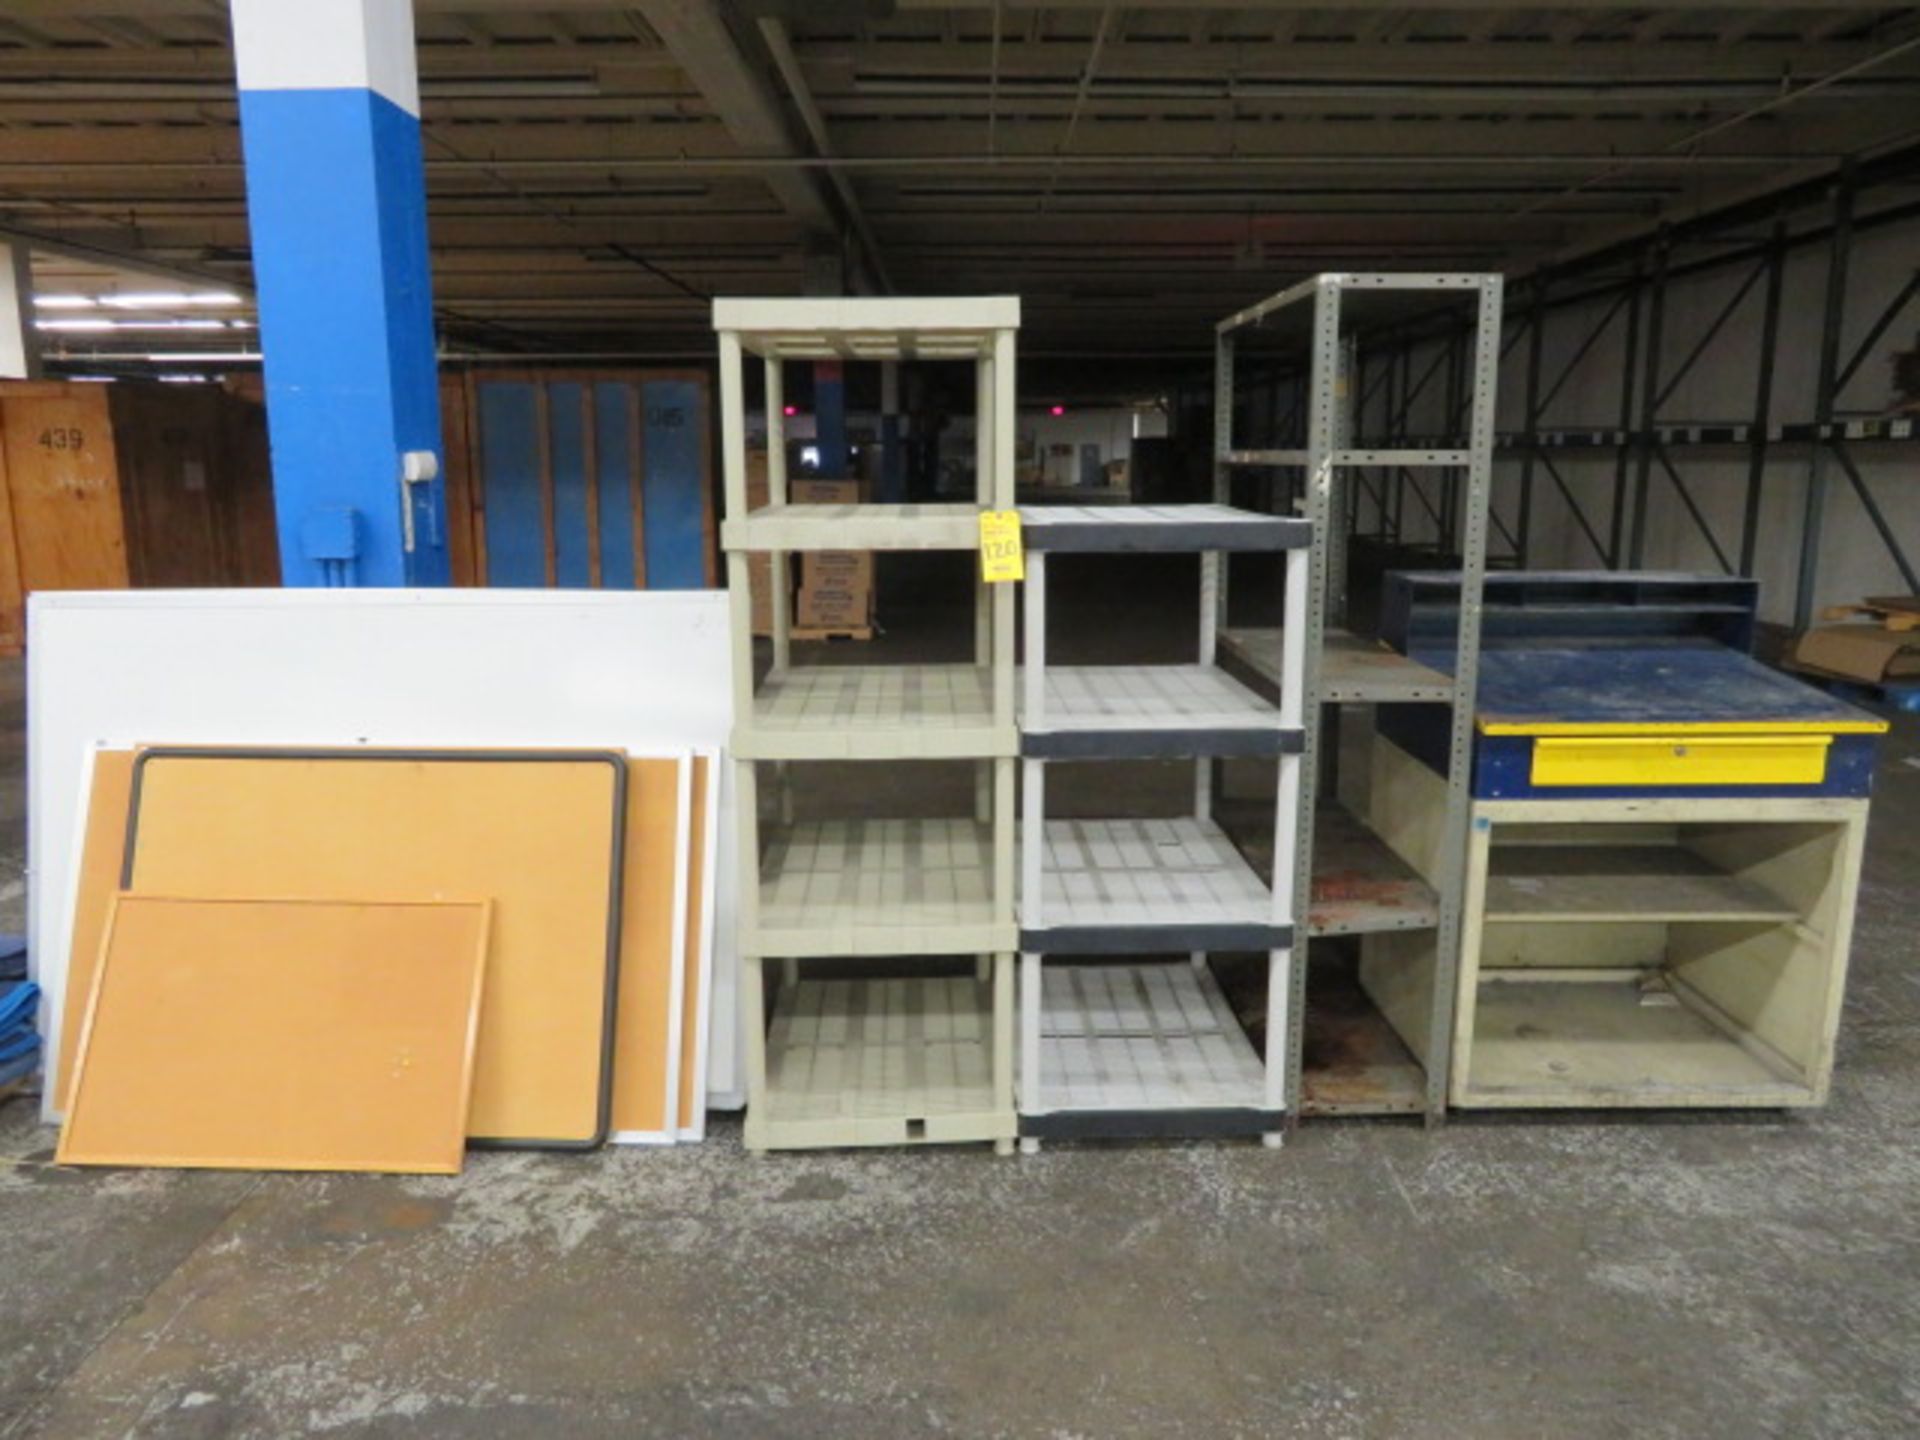 SHOP DESK, ASSORTED SHELF UNITS AND ERASEABLE MEMO & BULLETIN BOARDS (LOCATED IN MOORESTOWN, NJ)